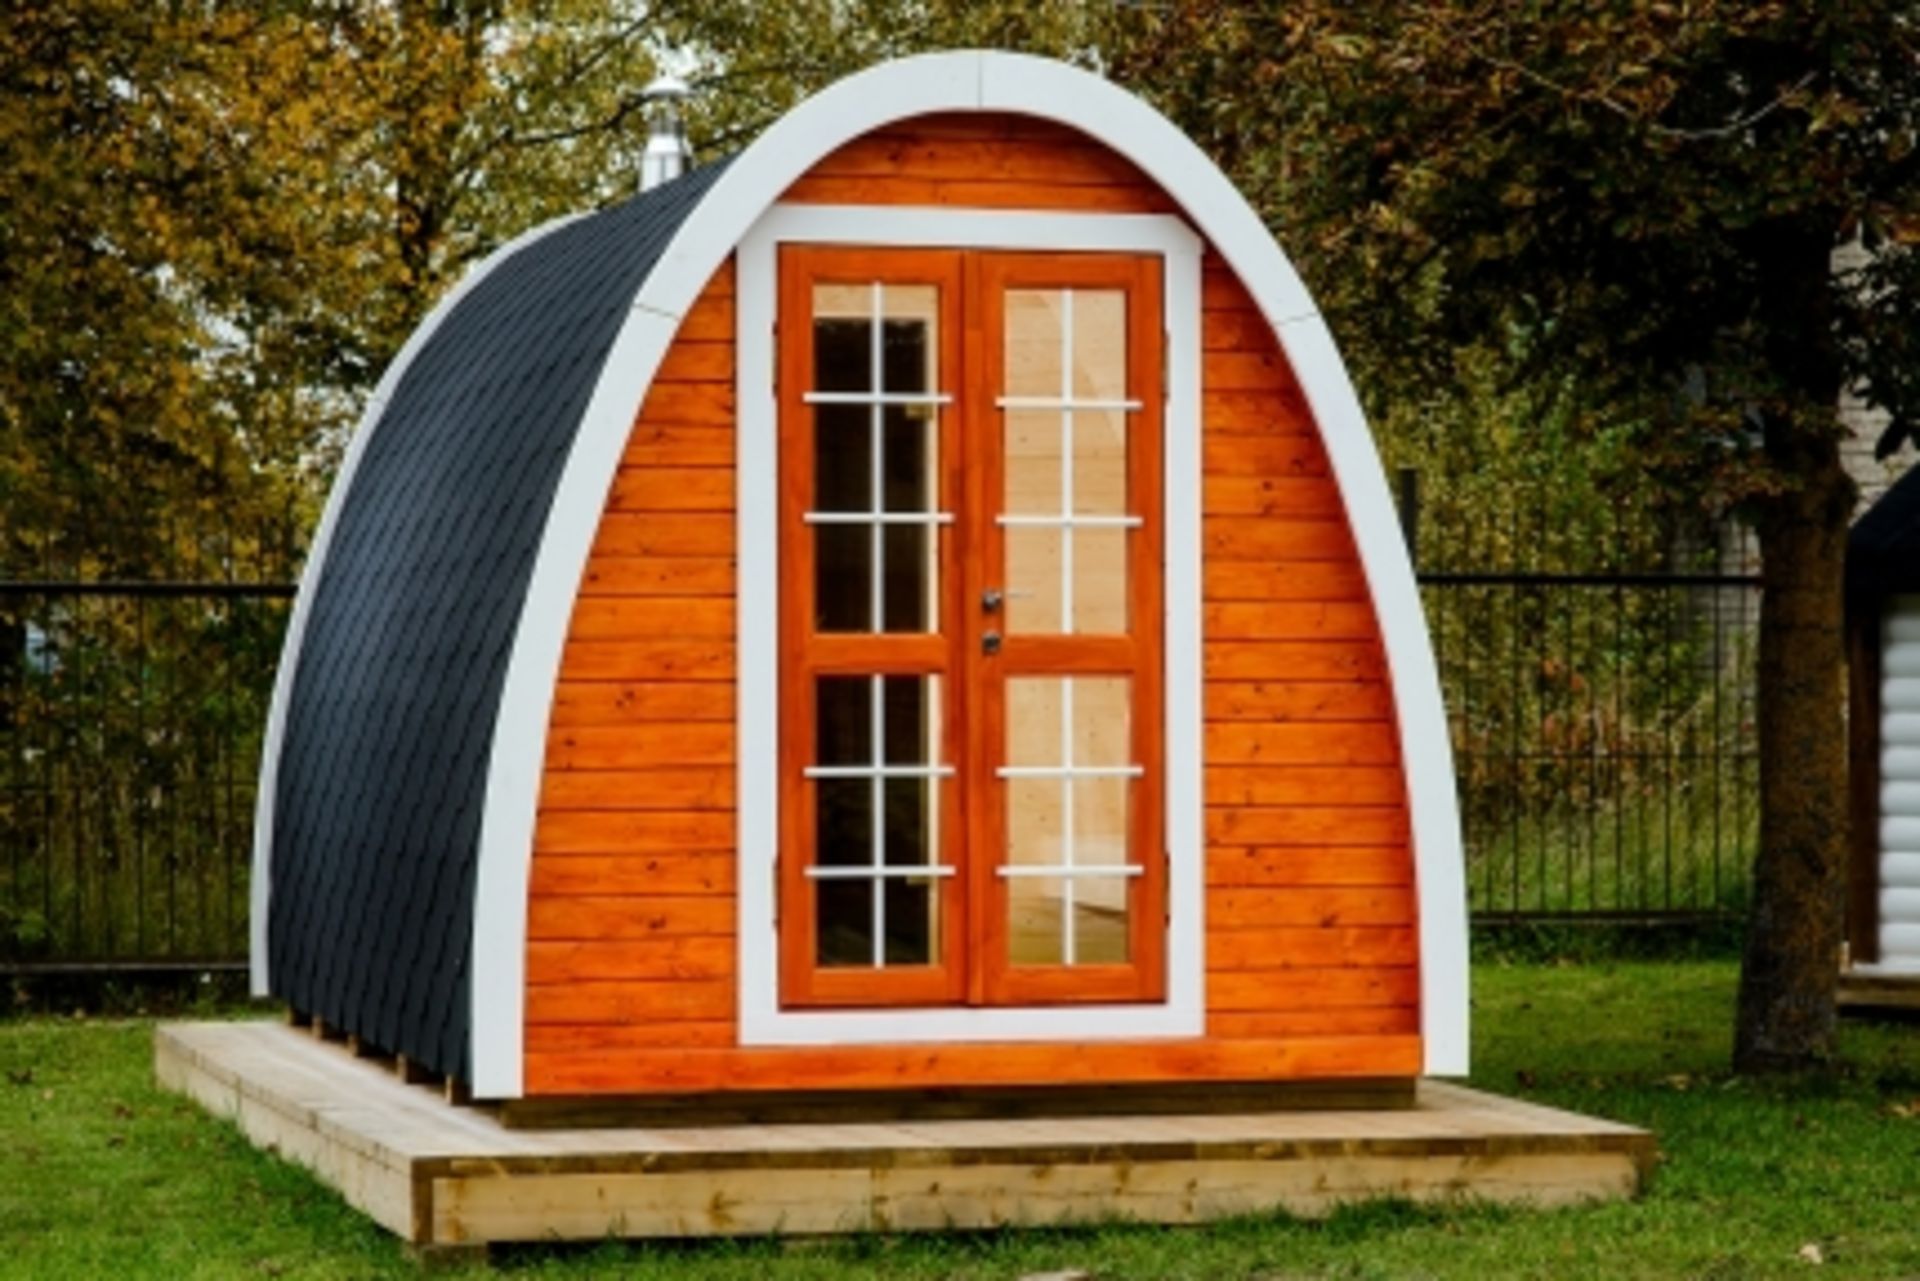 V Brand New 2.4 x 4m Sauna Pod - Made From Spruce Wood - Roof Covered With Bitumen Shingles - Two